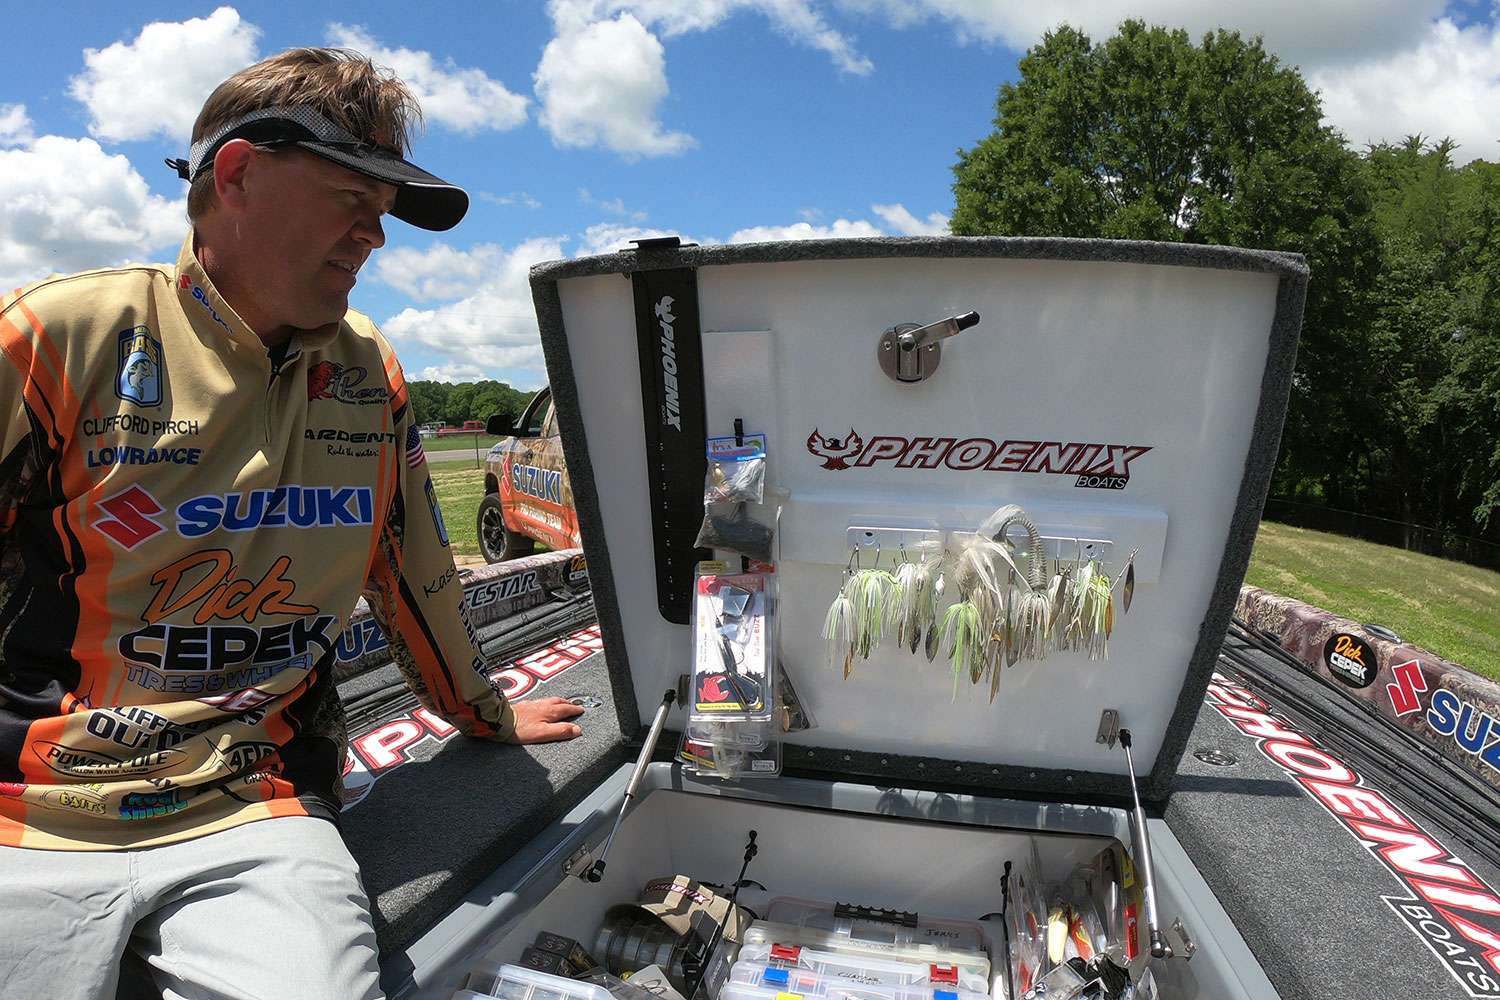 The next storage box is loaded with an impressive tackle assortment, all of which are the types of lures he needs regularly. This is his day-to-day box.